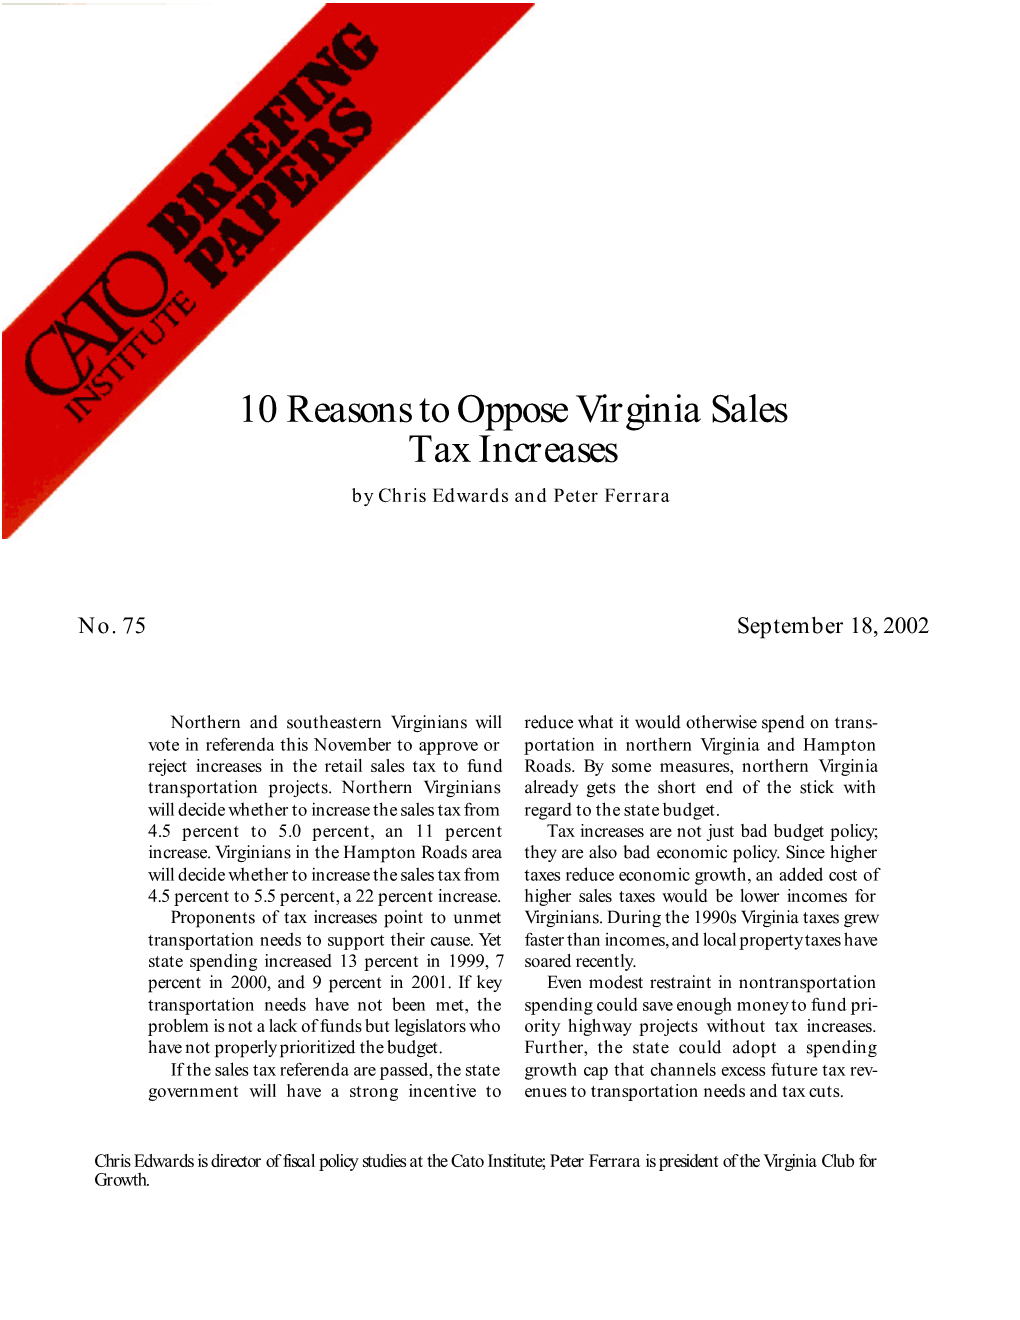 10 Reasons to Oppose Virginia Sales Tax Increases by Chris Edwards and Peter Ferrara